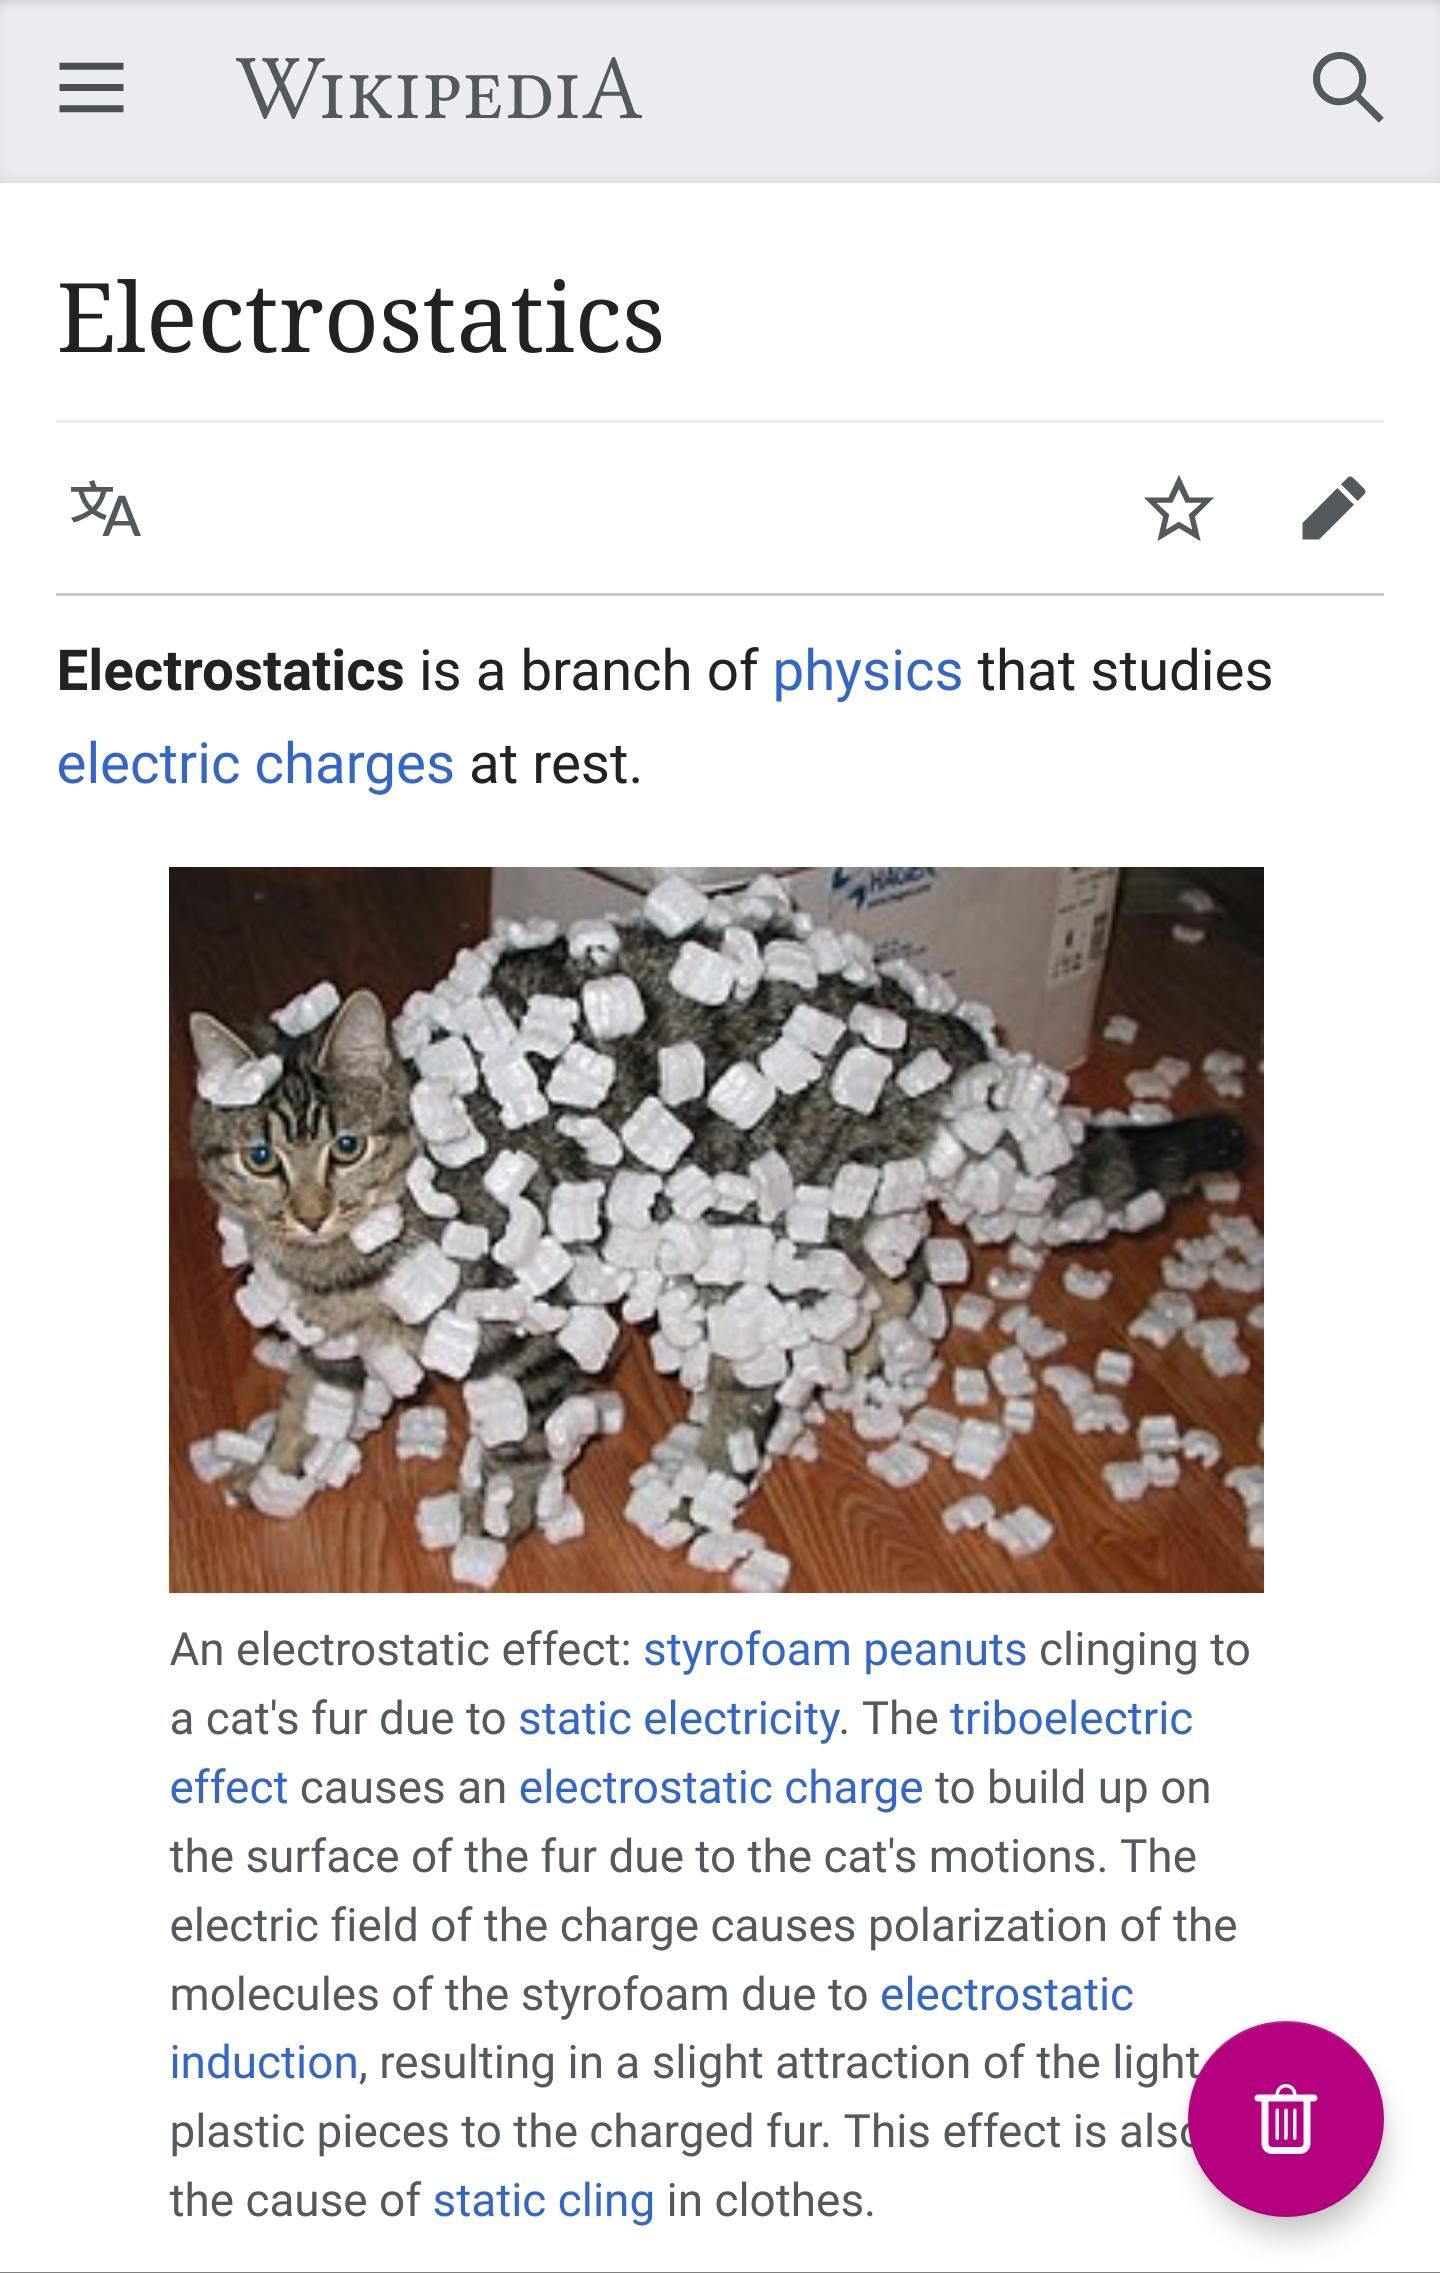 Wikipedia's use of a cat to describe electrostatics.